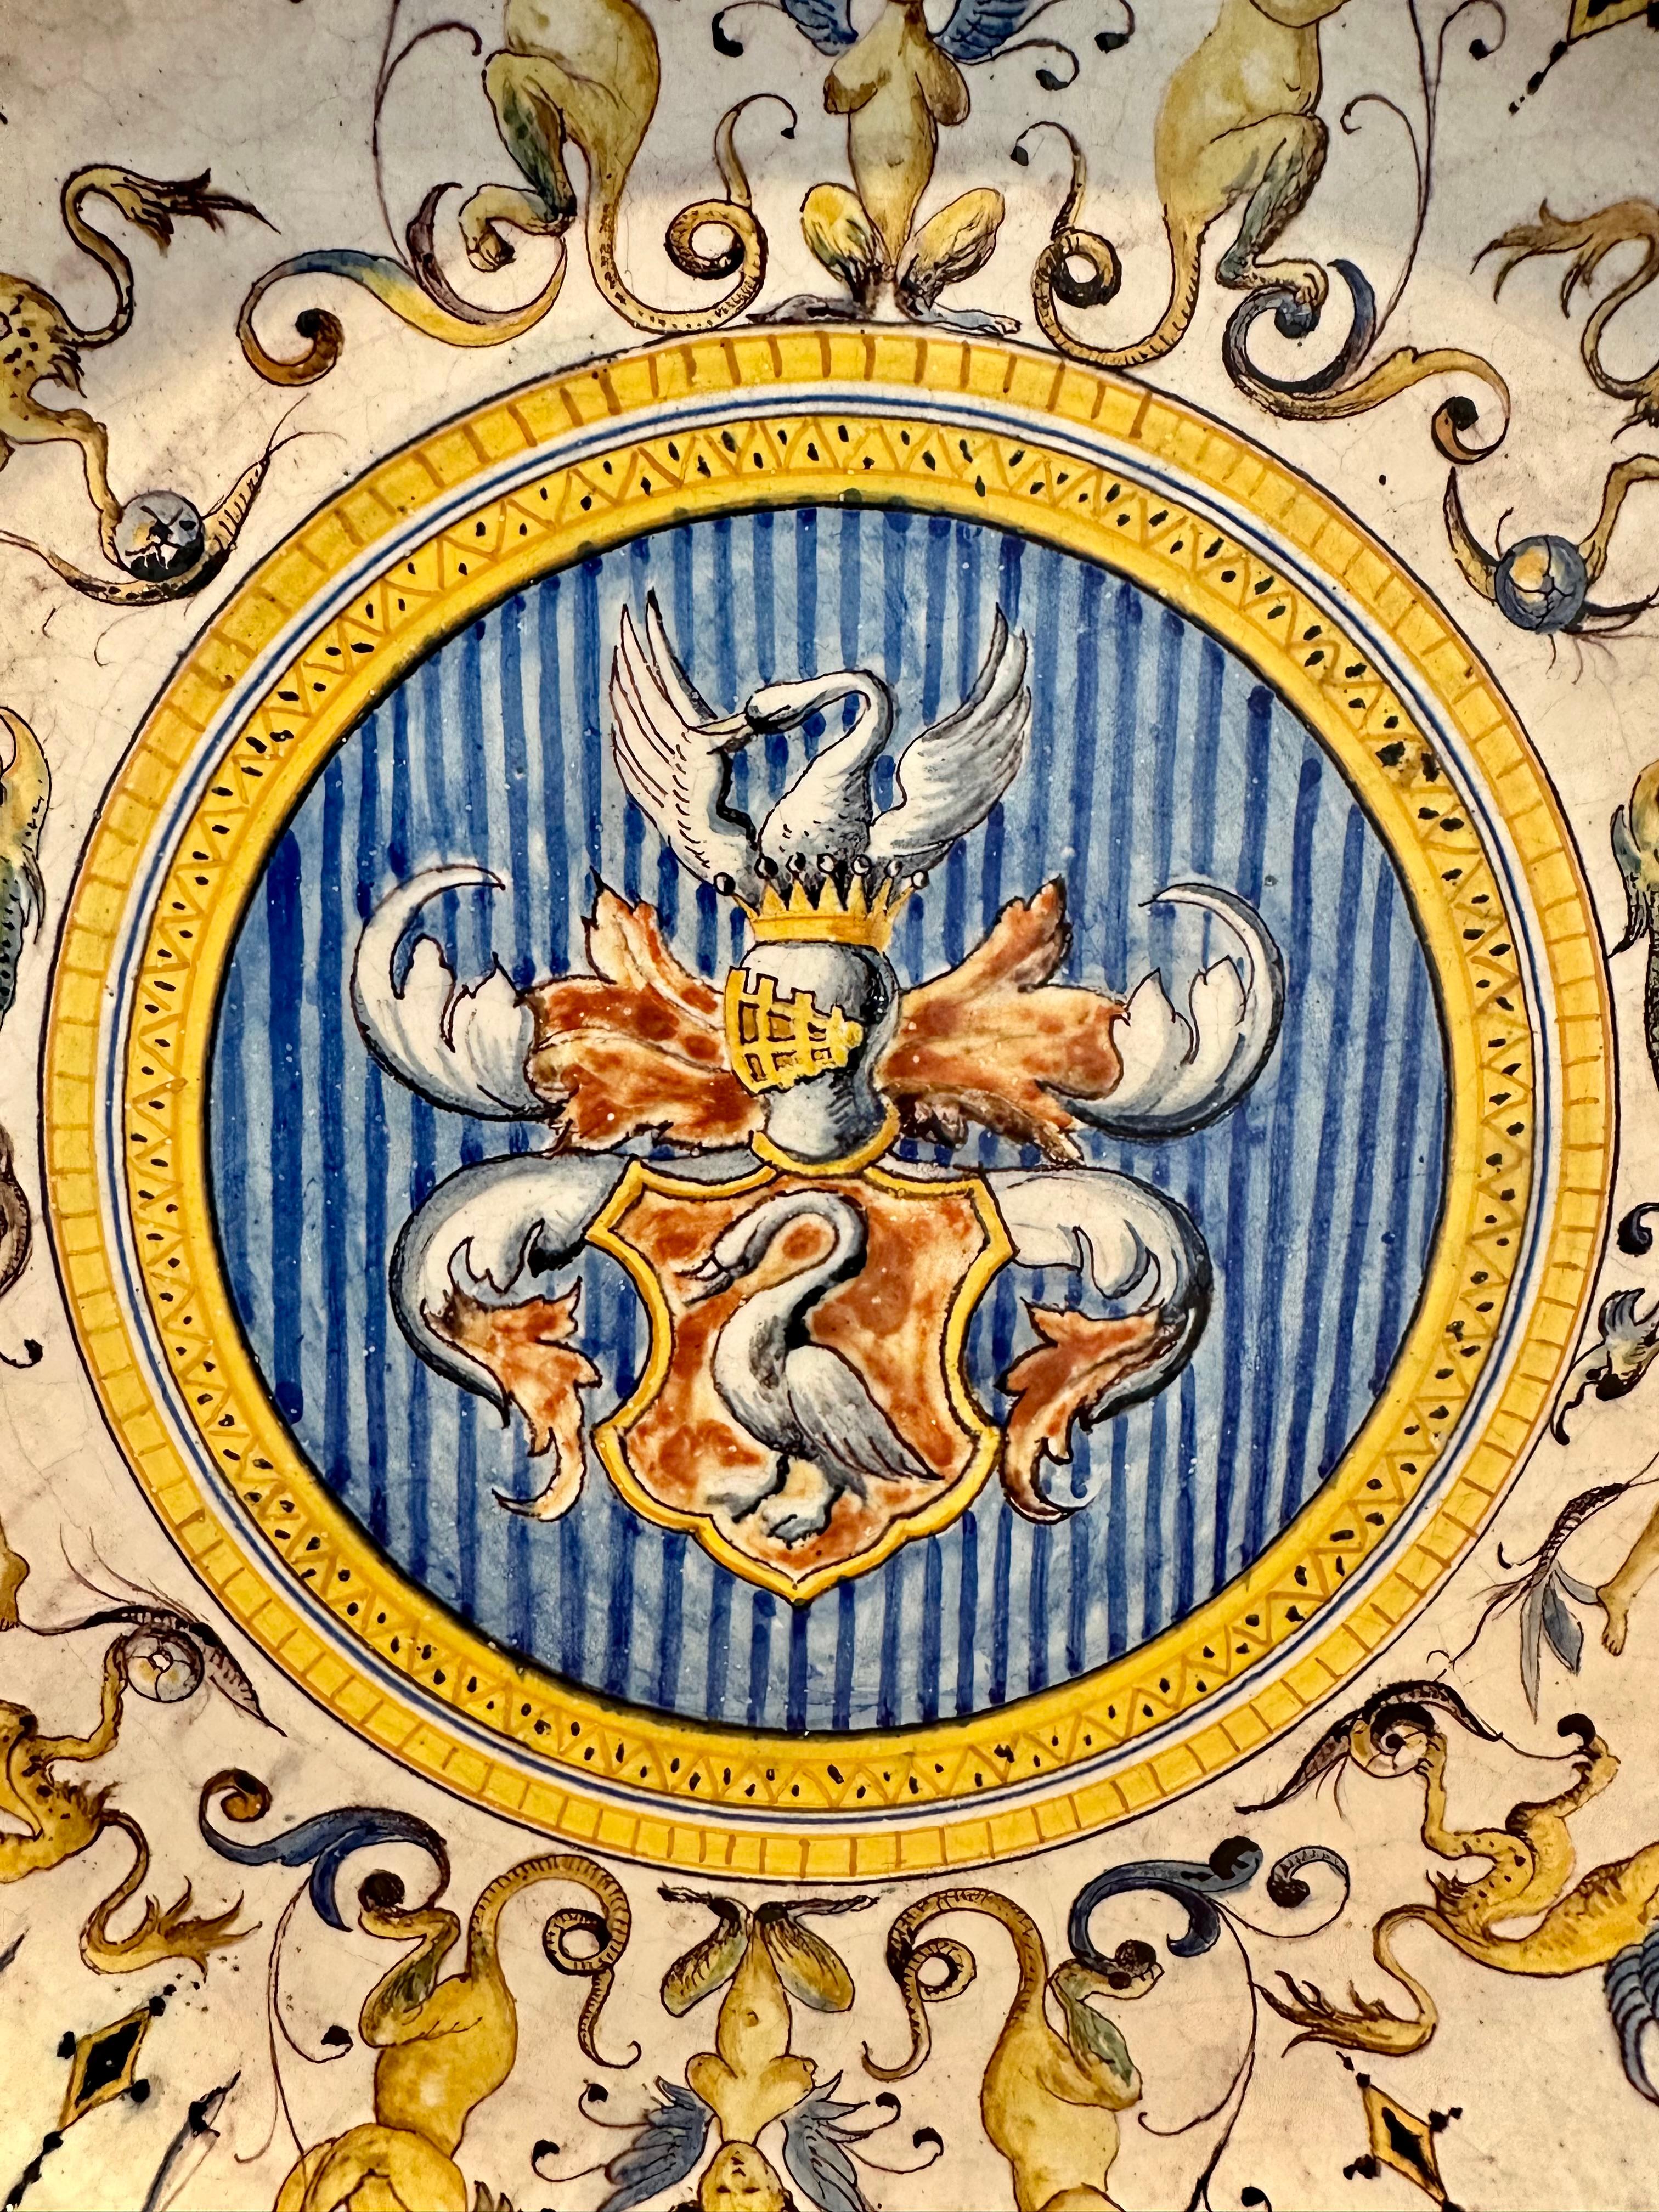 Italian Cantagalli Maiolica Large Plate with family noble emblem, Late 19th Century 

During the 19th century Renaissance-Revival period the Cantagalli Maiolica and ceramic factory near Florence produced authentic copies of Renaissance Maiolica